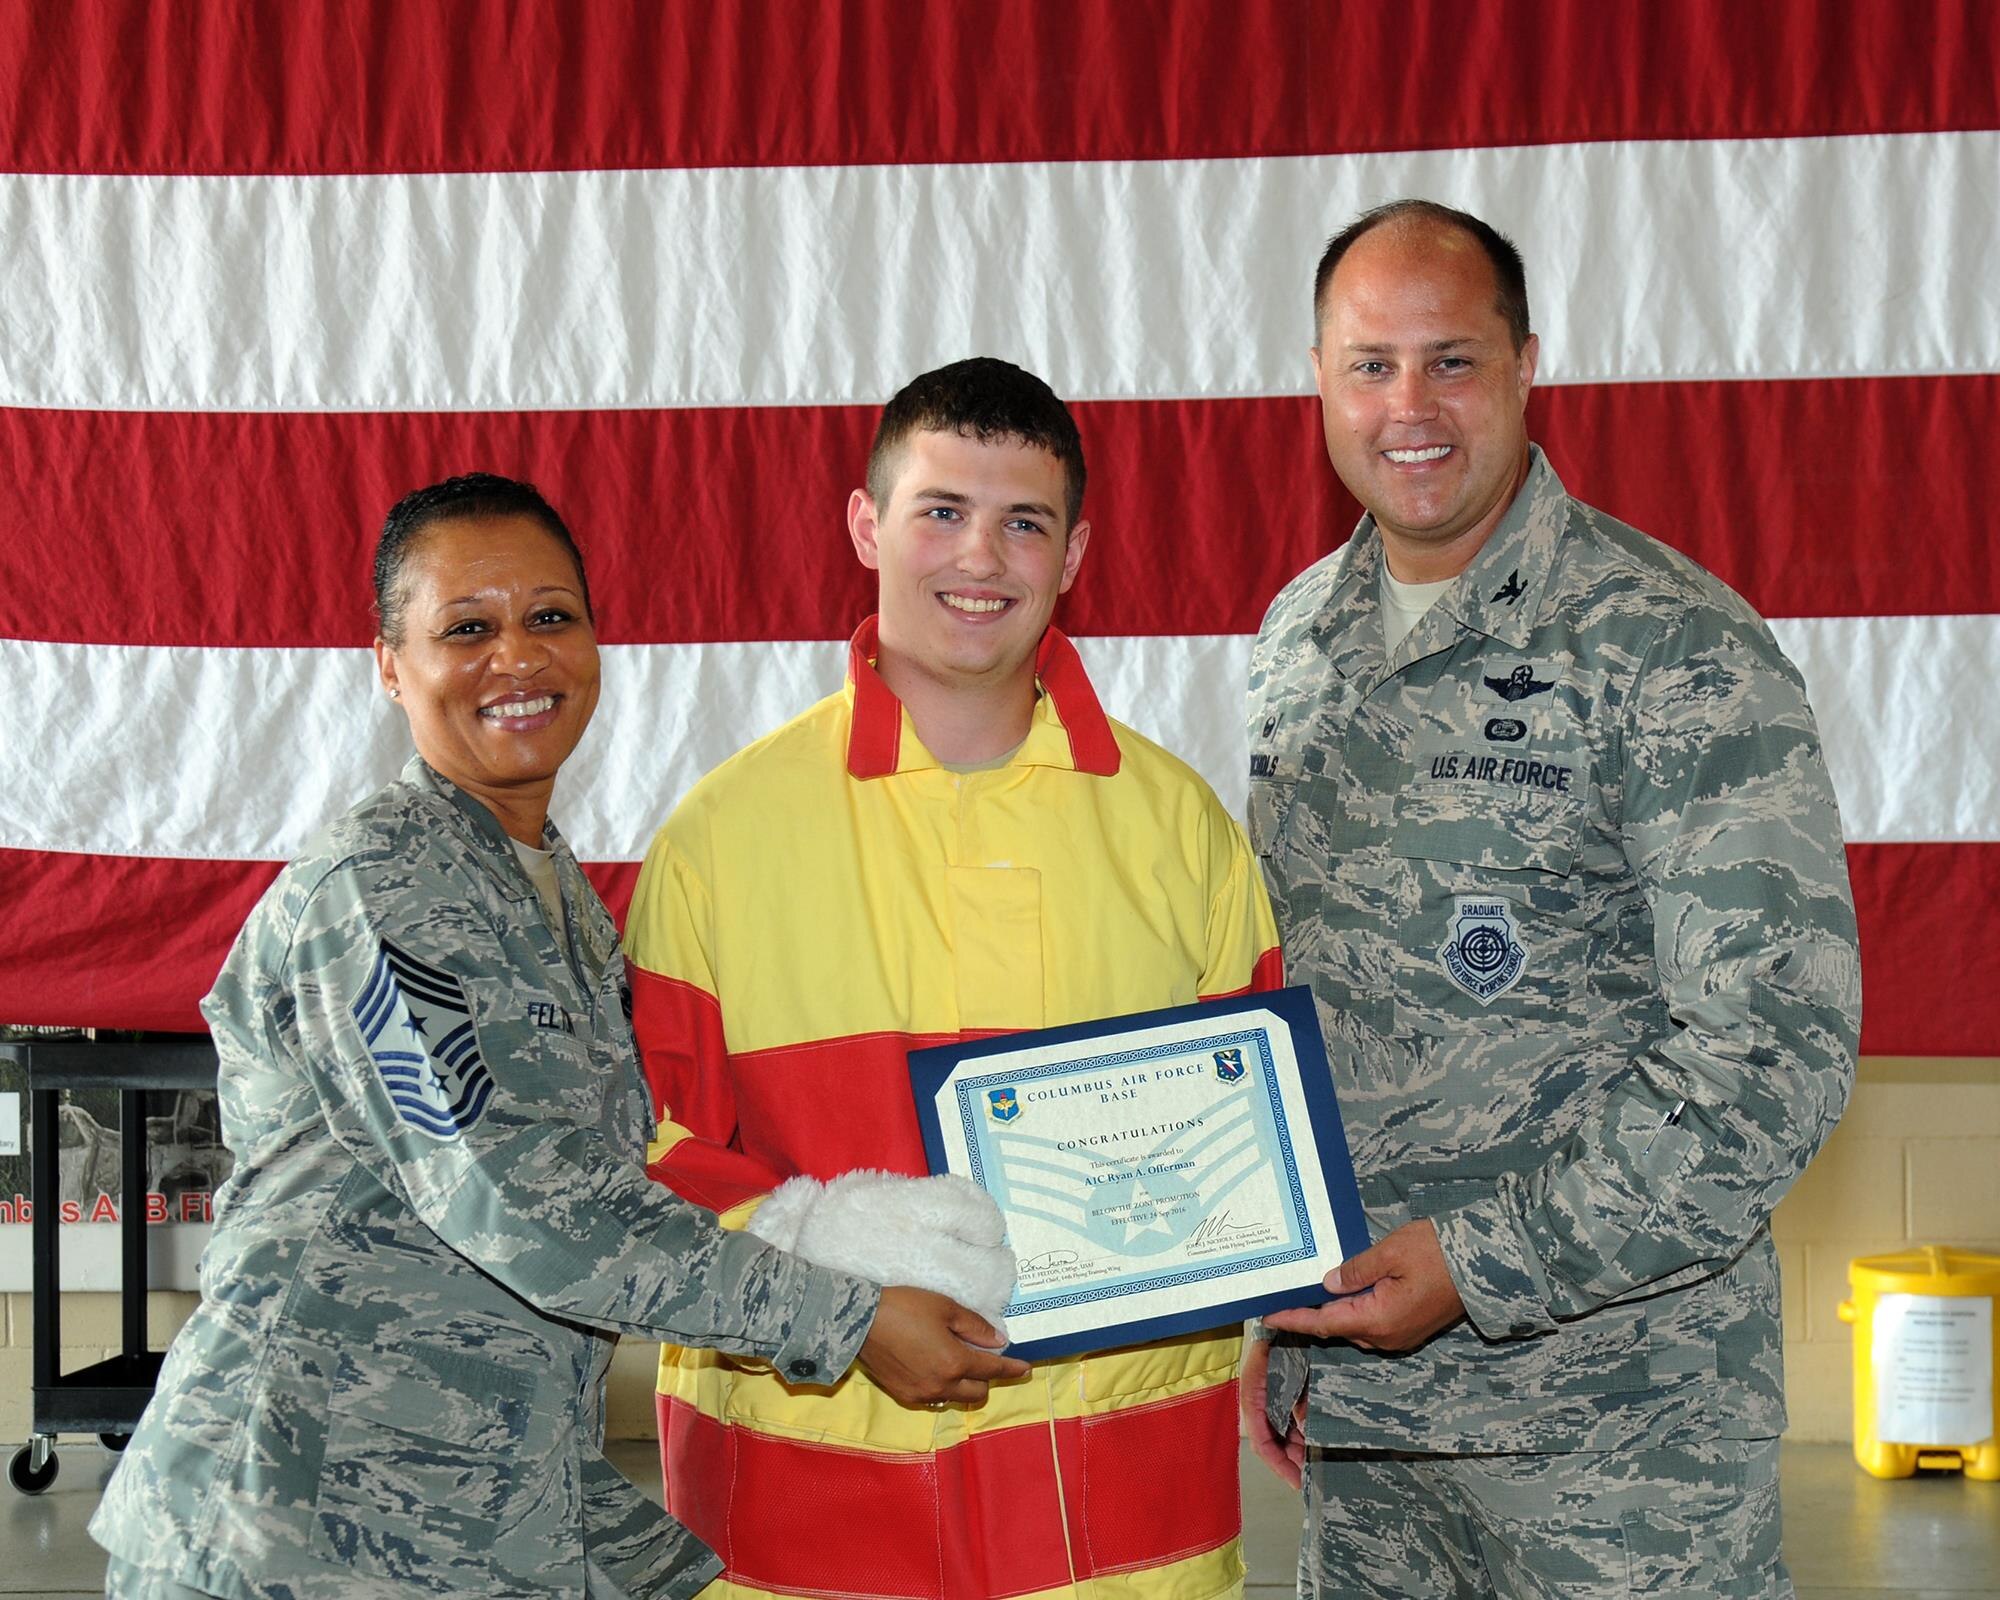 Chief Master Sgt. Rita Felton, 14th Flying Training Wing Command Chief, left, and Col. John Nichols, 14th FTW Commander, left, hand Airman 1st Class Ryan Offerman, 14th Civil Engineer Squadron Firefighter, his Below the Zone certificate June 27 at Columbus Air Force Base, Mississippi. BTZ is the competitive promotion program offered to enlisted personnel in the grade of Airman First Class earning them a promotion six months earlier than normal. Offerman was told to get dressed as the mascot Sparky for children touring the Fire Station but upon his return he was surprised with his notification of BTZ from base leadership and his team. (U.S. Air Force photo/Sharon Ybarra)